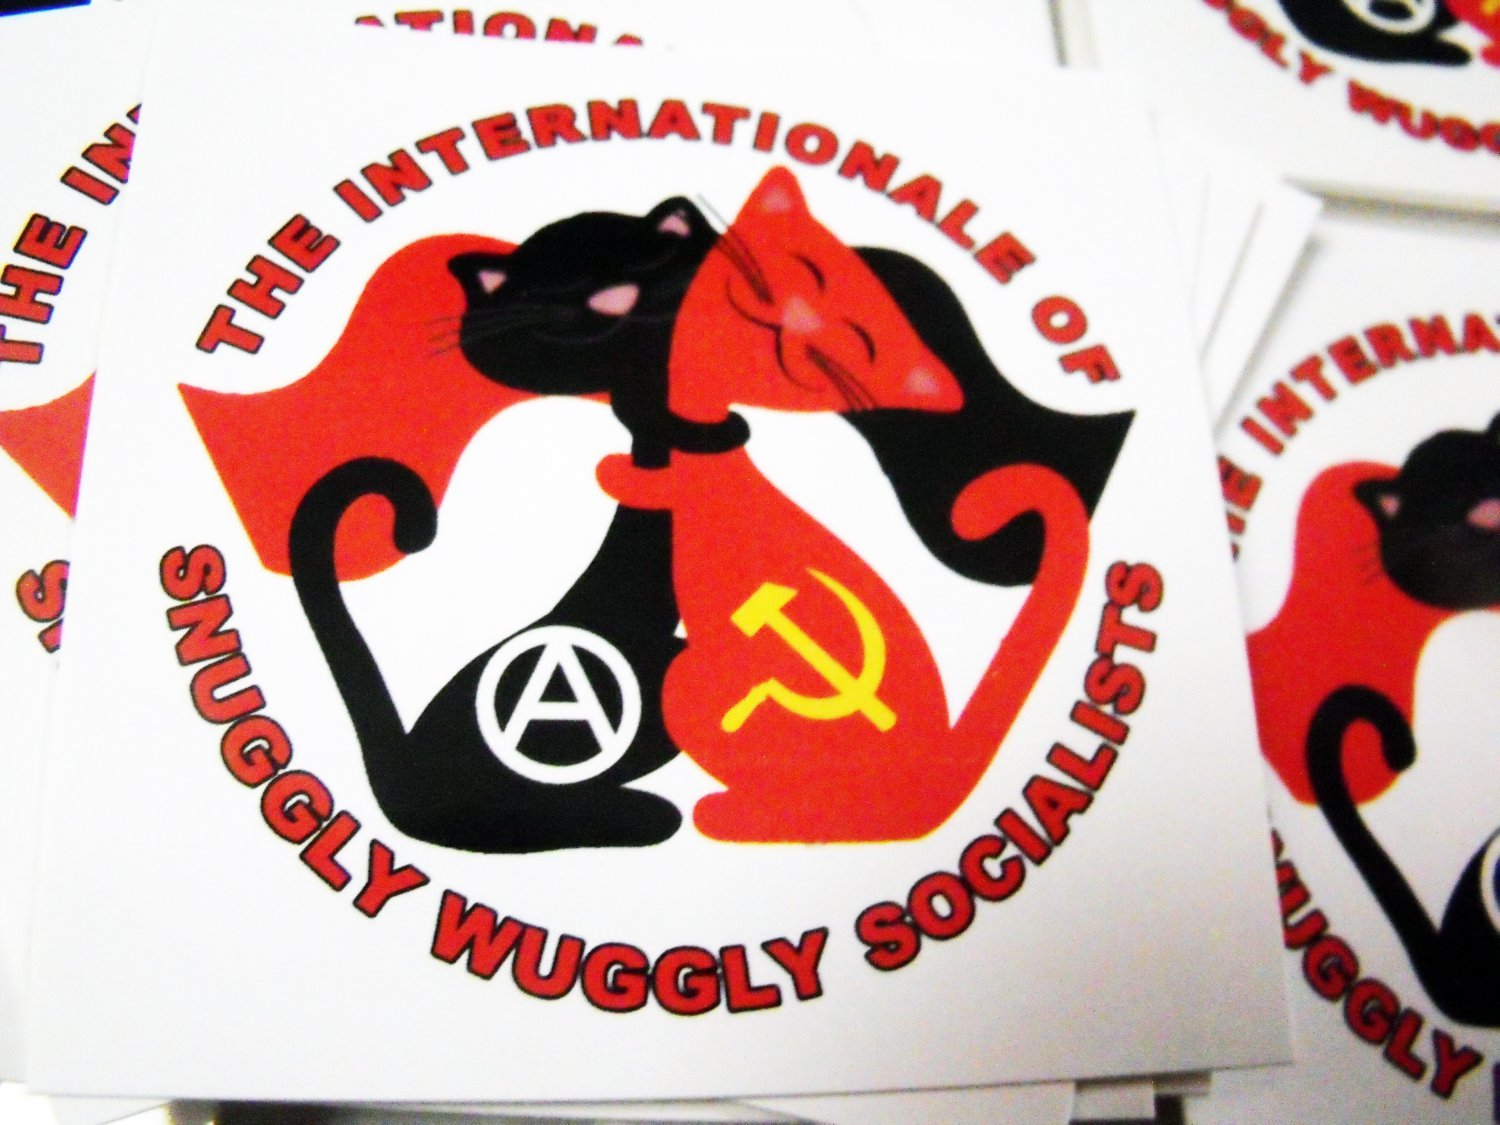 300 THE INTERNATIoNALE oF SNUGGLY WUGGLY SoCIALISTS 2.5" x 2.5" stickers